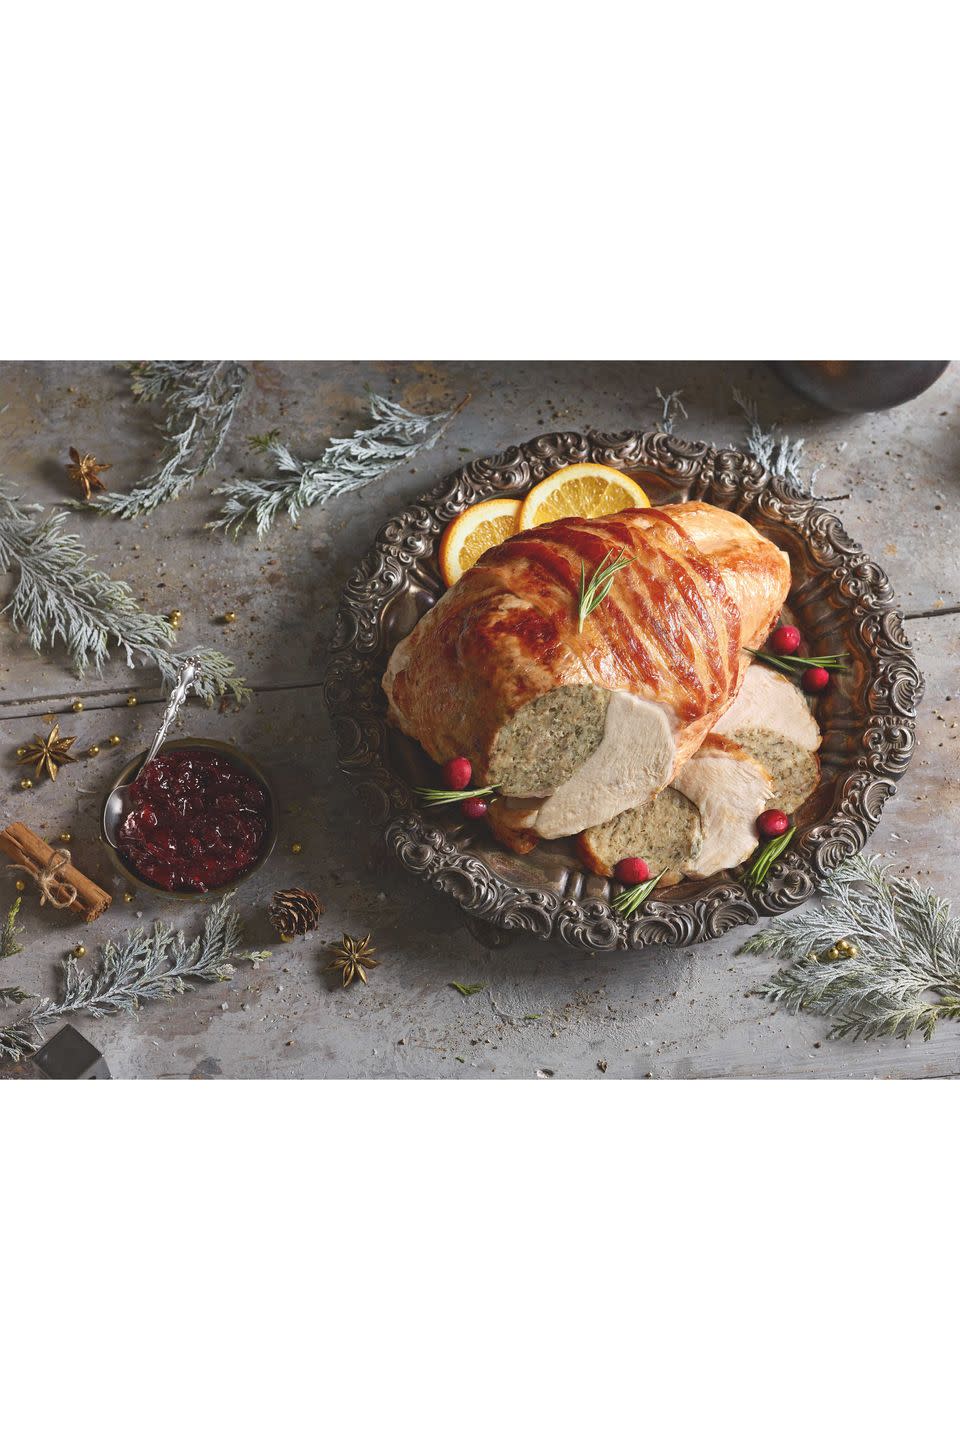 RUNNER-UP: Aldi Specially Selected Stuffed Turkey Crown